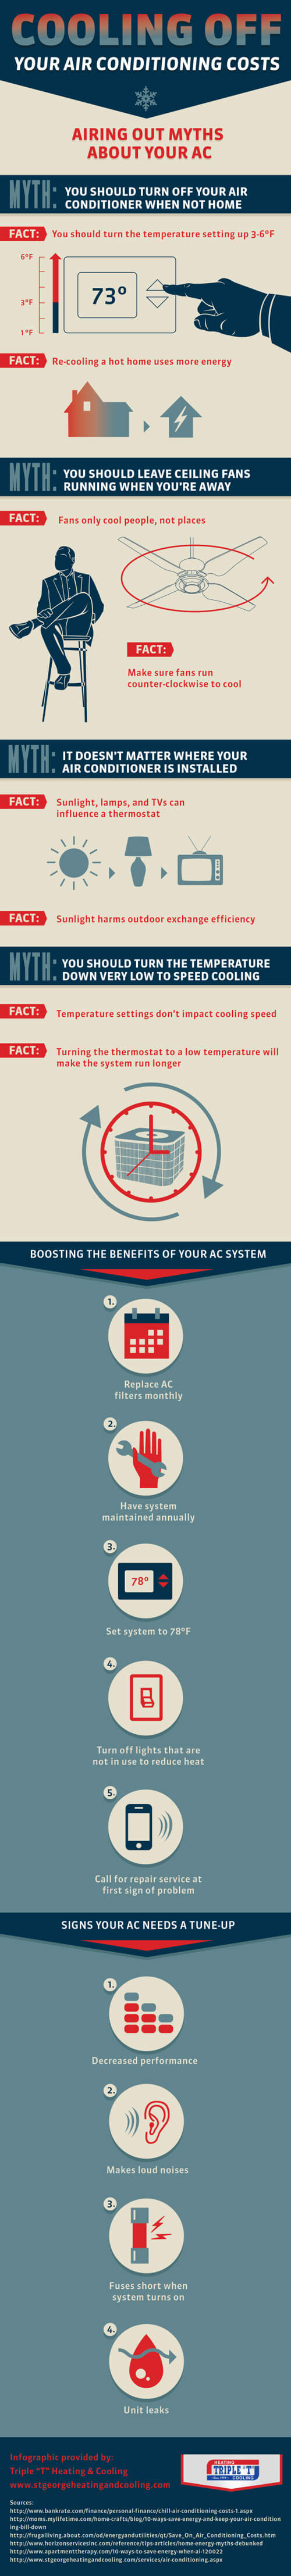 your air conditioning costs infographic